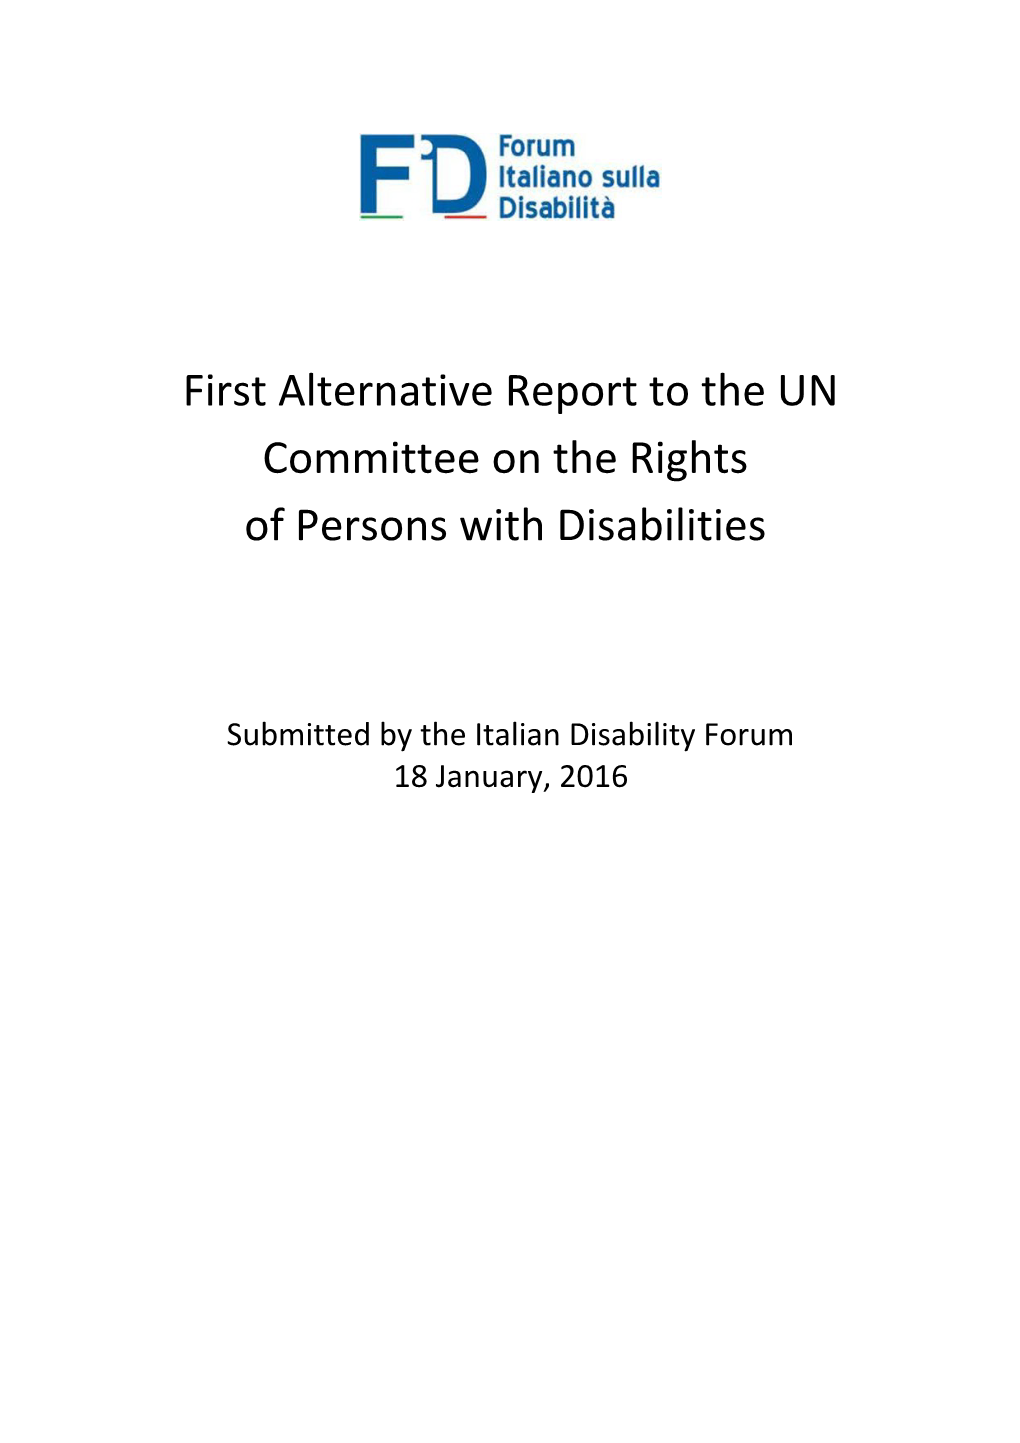 First Alternative Report to the UN Committee on the Rights